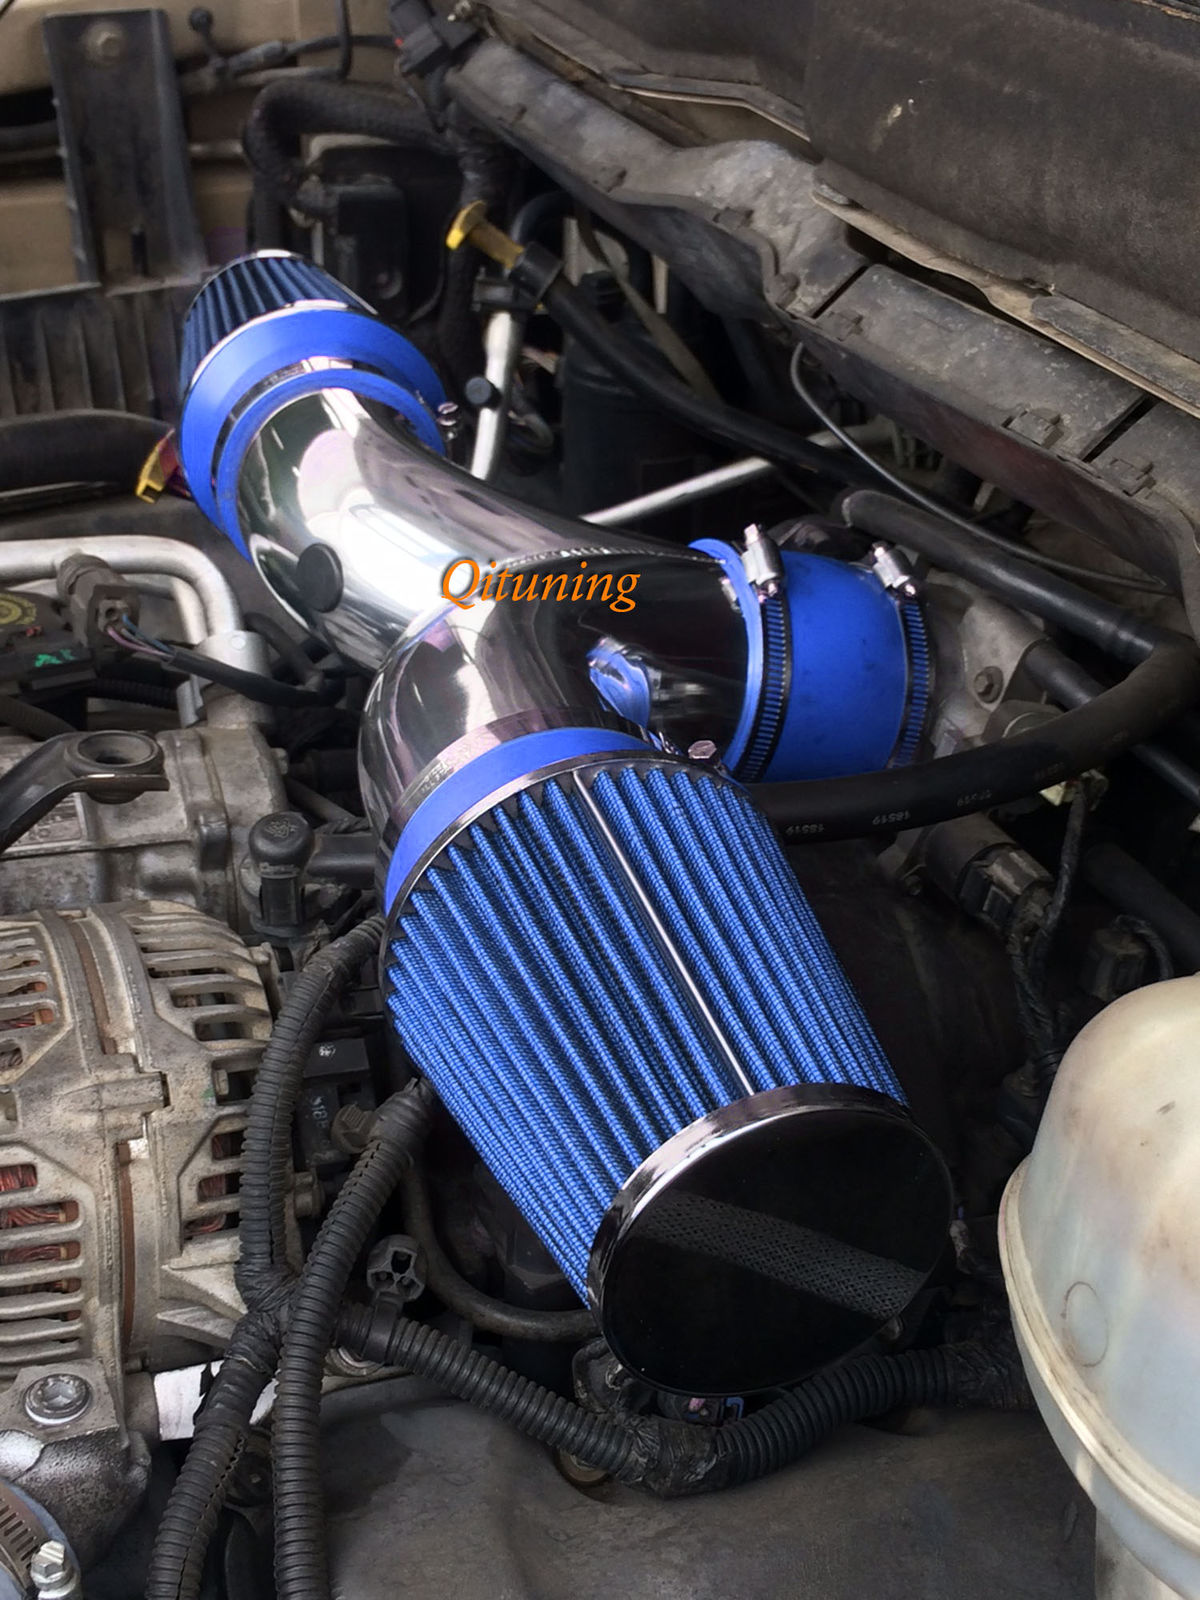 Blue-Dual-Twin-Air-Intake-Filter-For-2008-2010.jpg